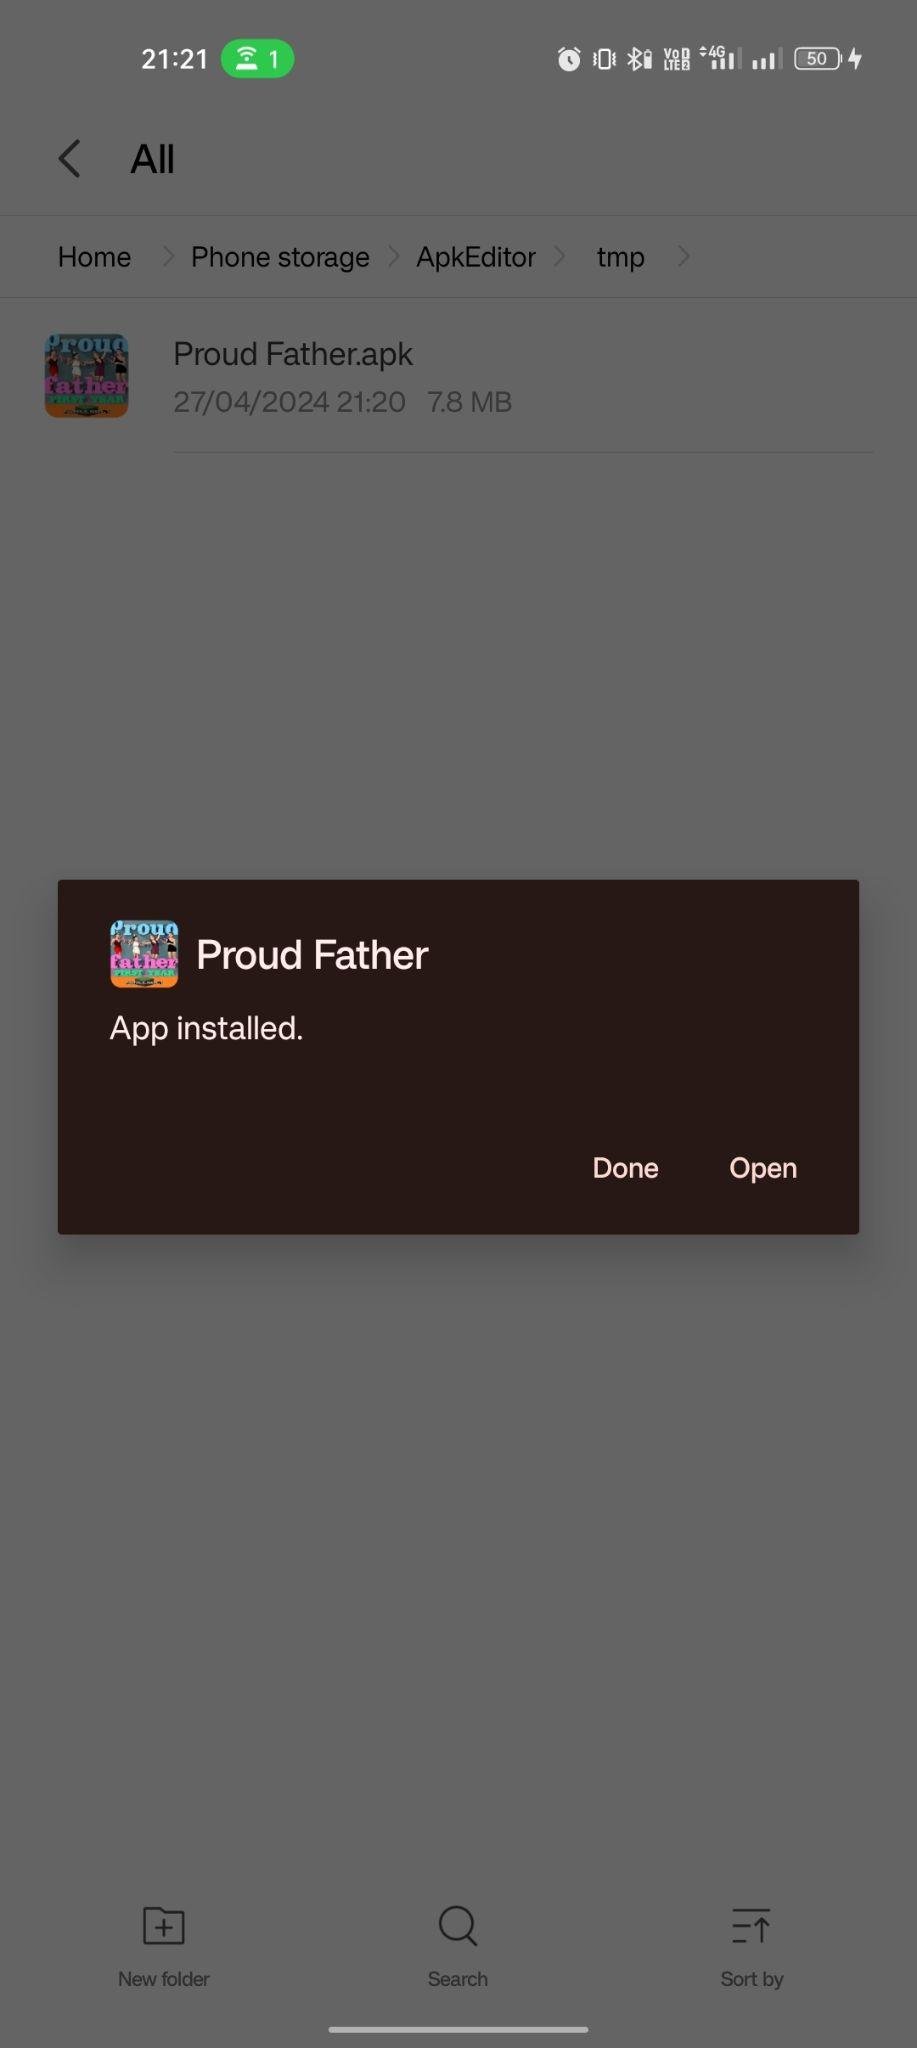 Proud Father apk installed